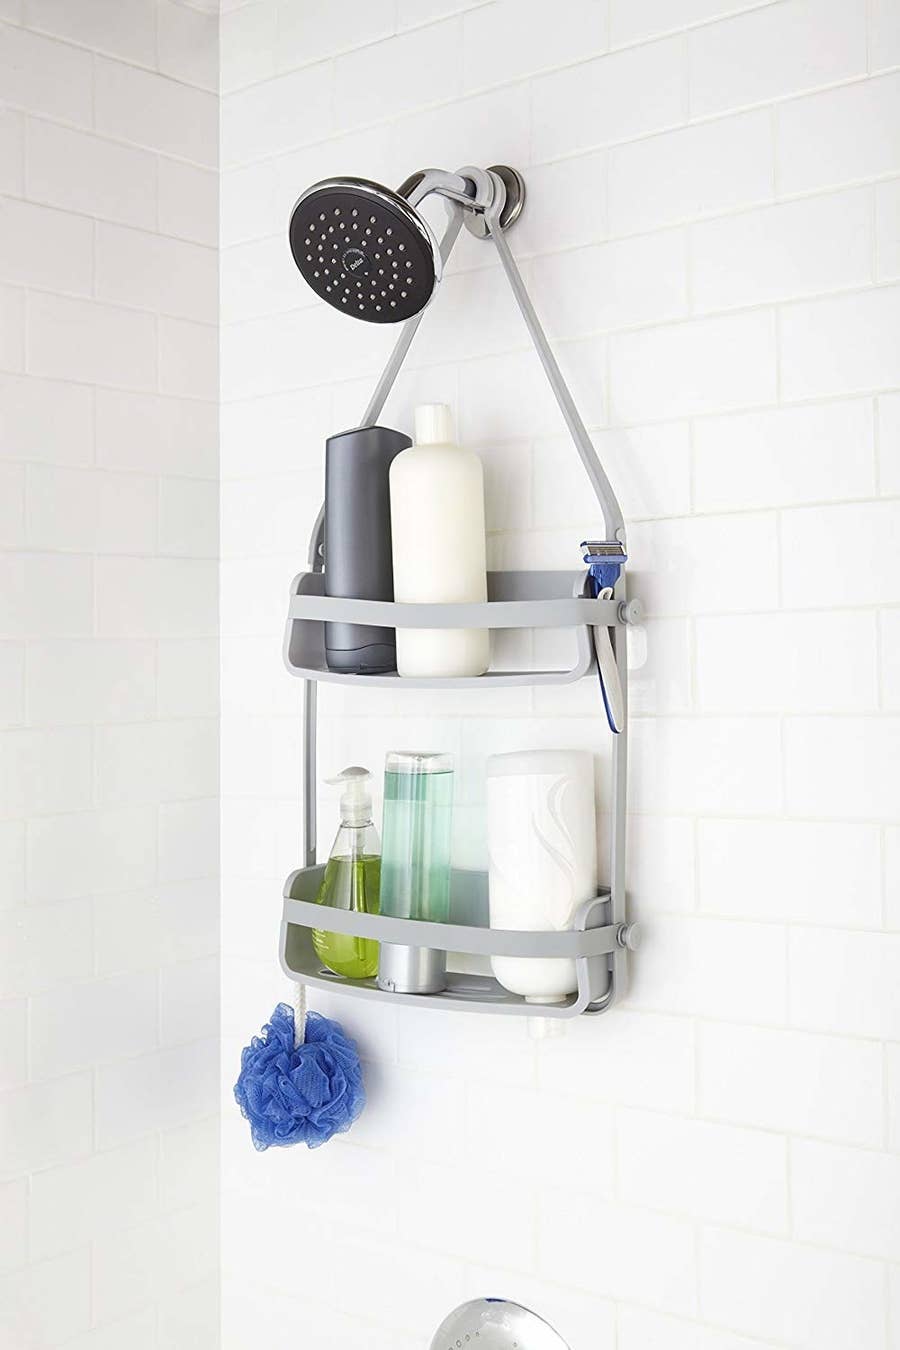 Top 10 Accessories You Need for Your Shower